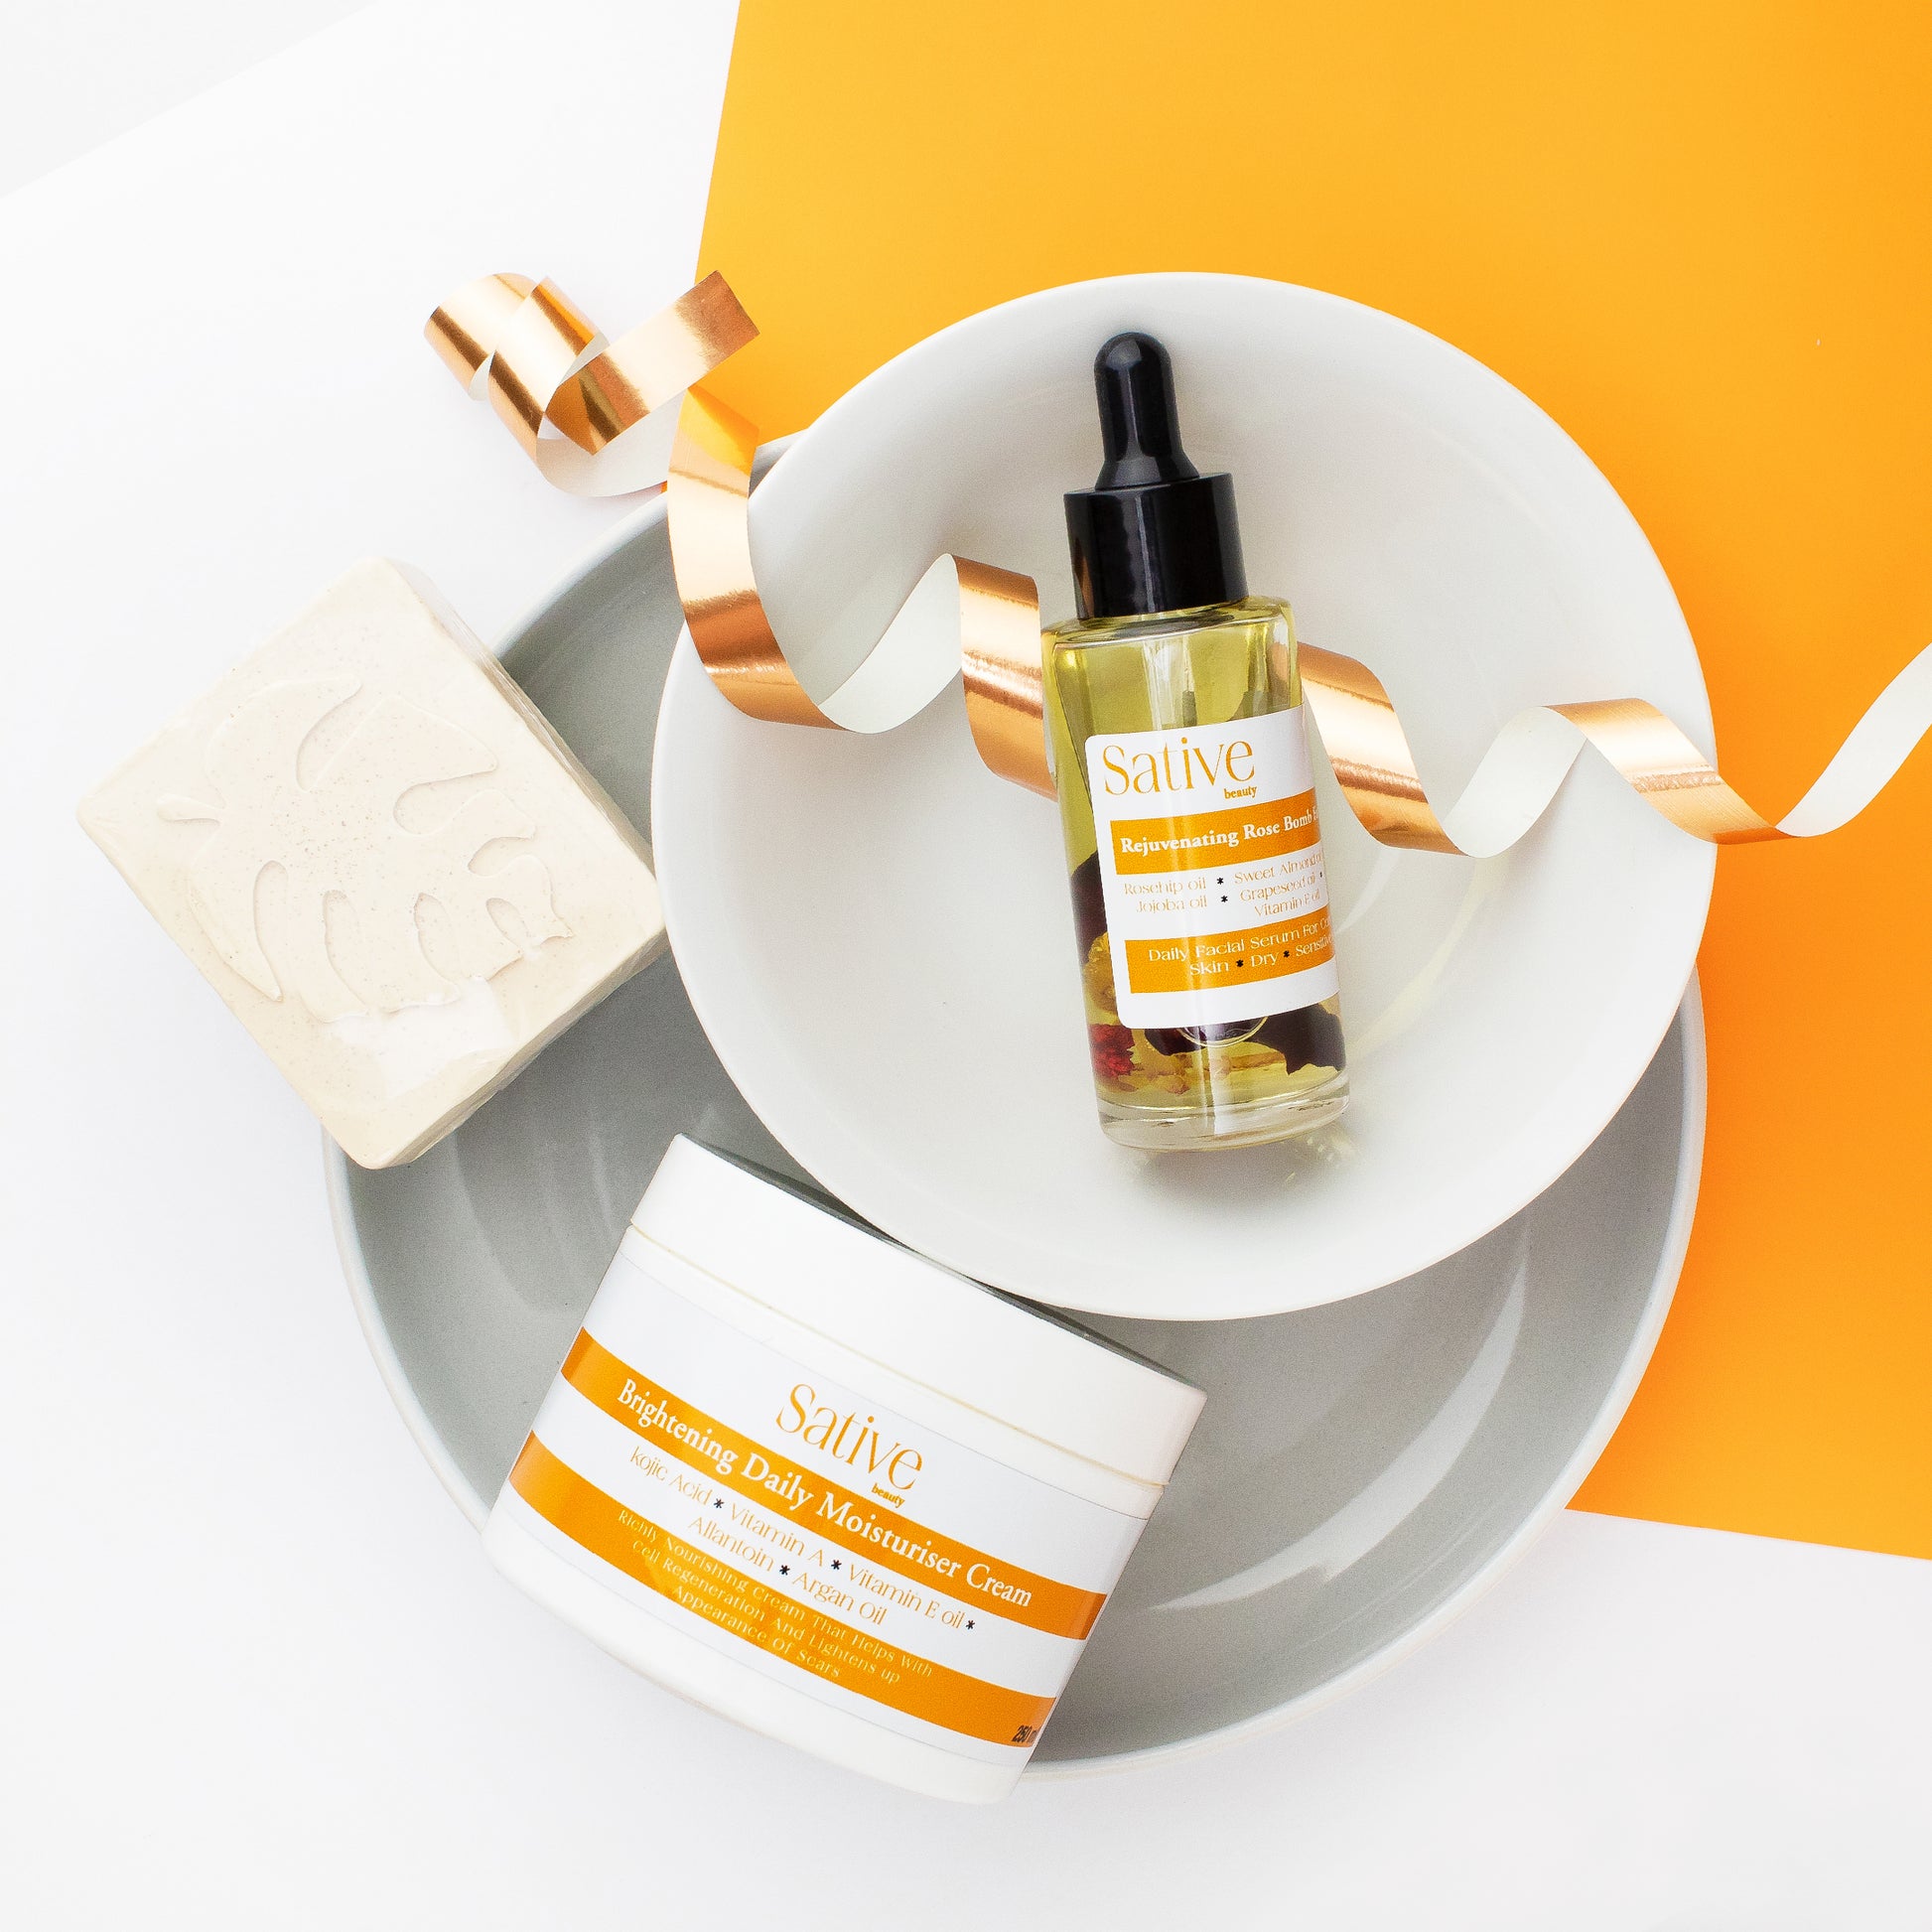 Sative's Organic skincare products